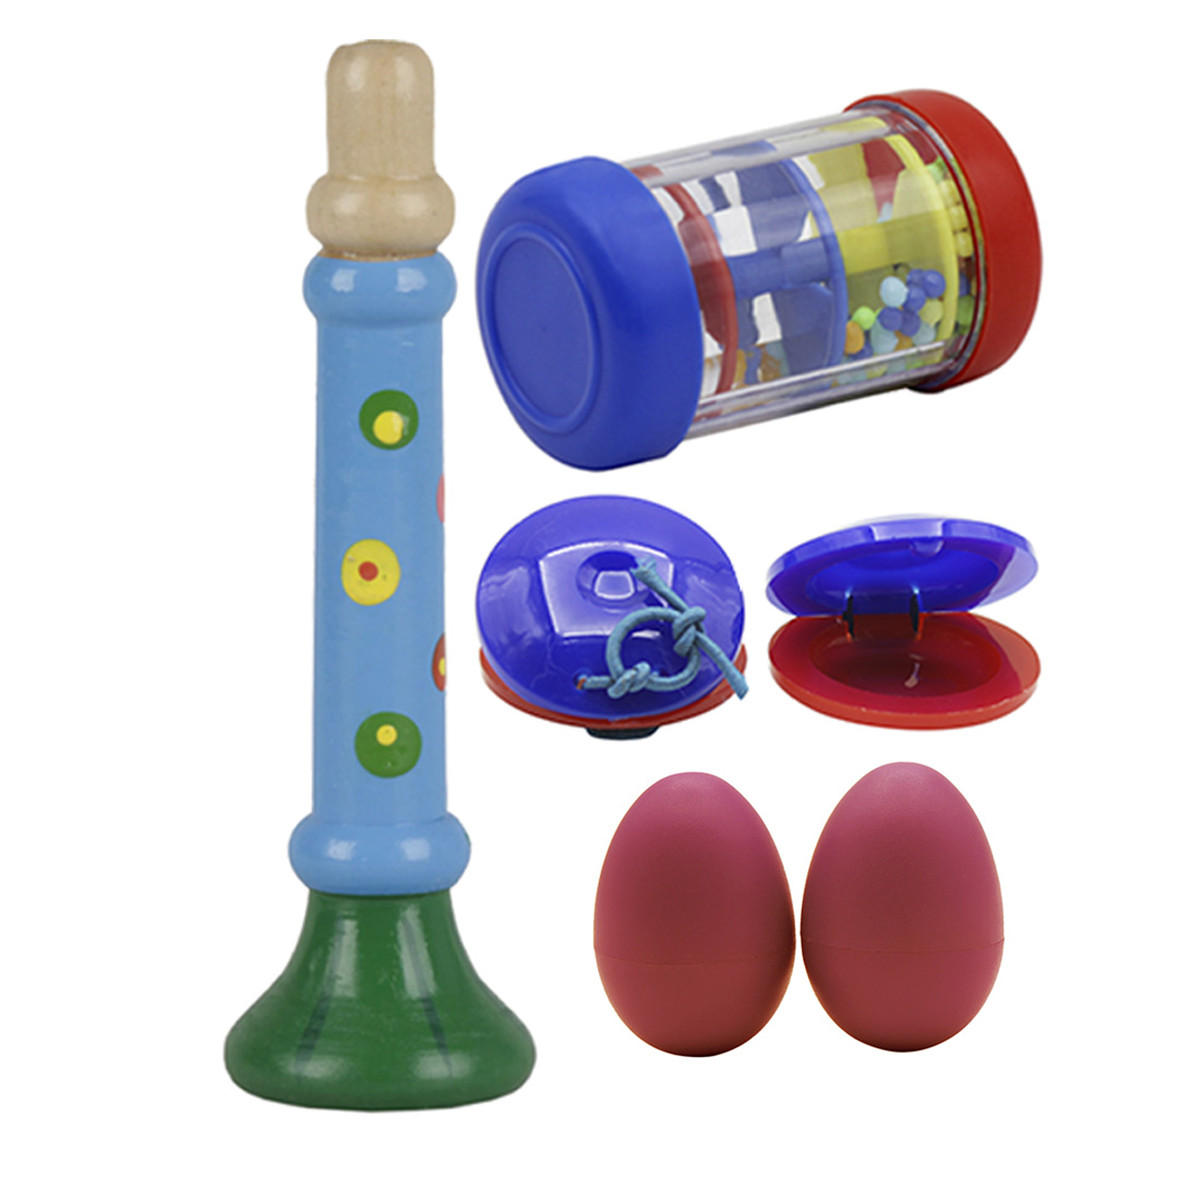 4-piece Set Orff Musical Instruments Sand Eggs/Rain Ring/Small Horn/Plastic Castanets for Children